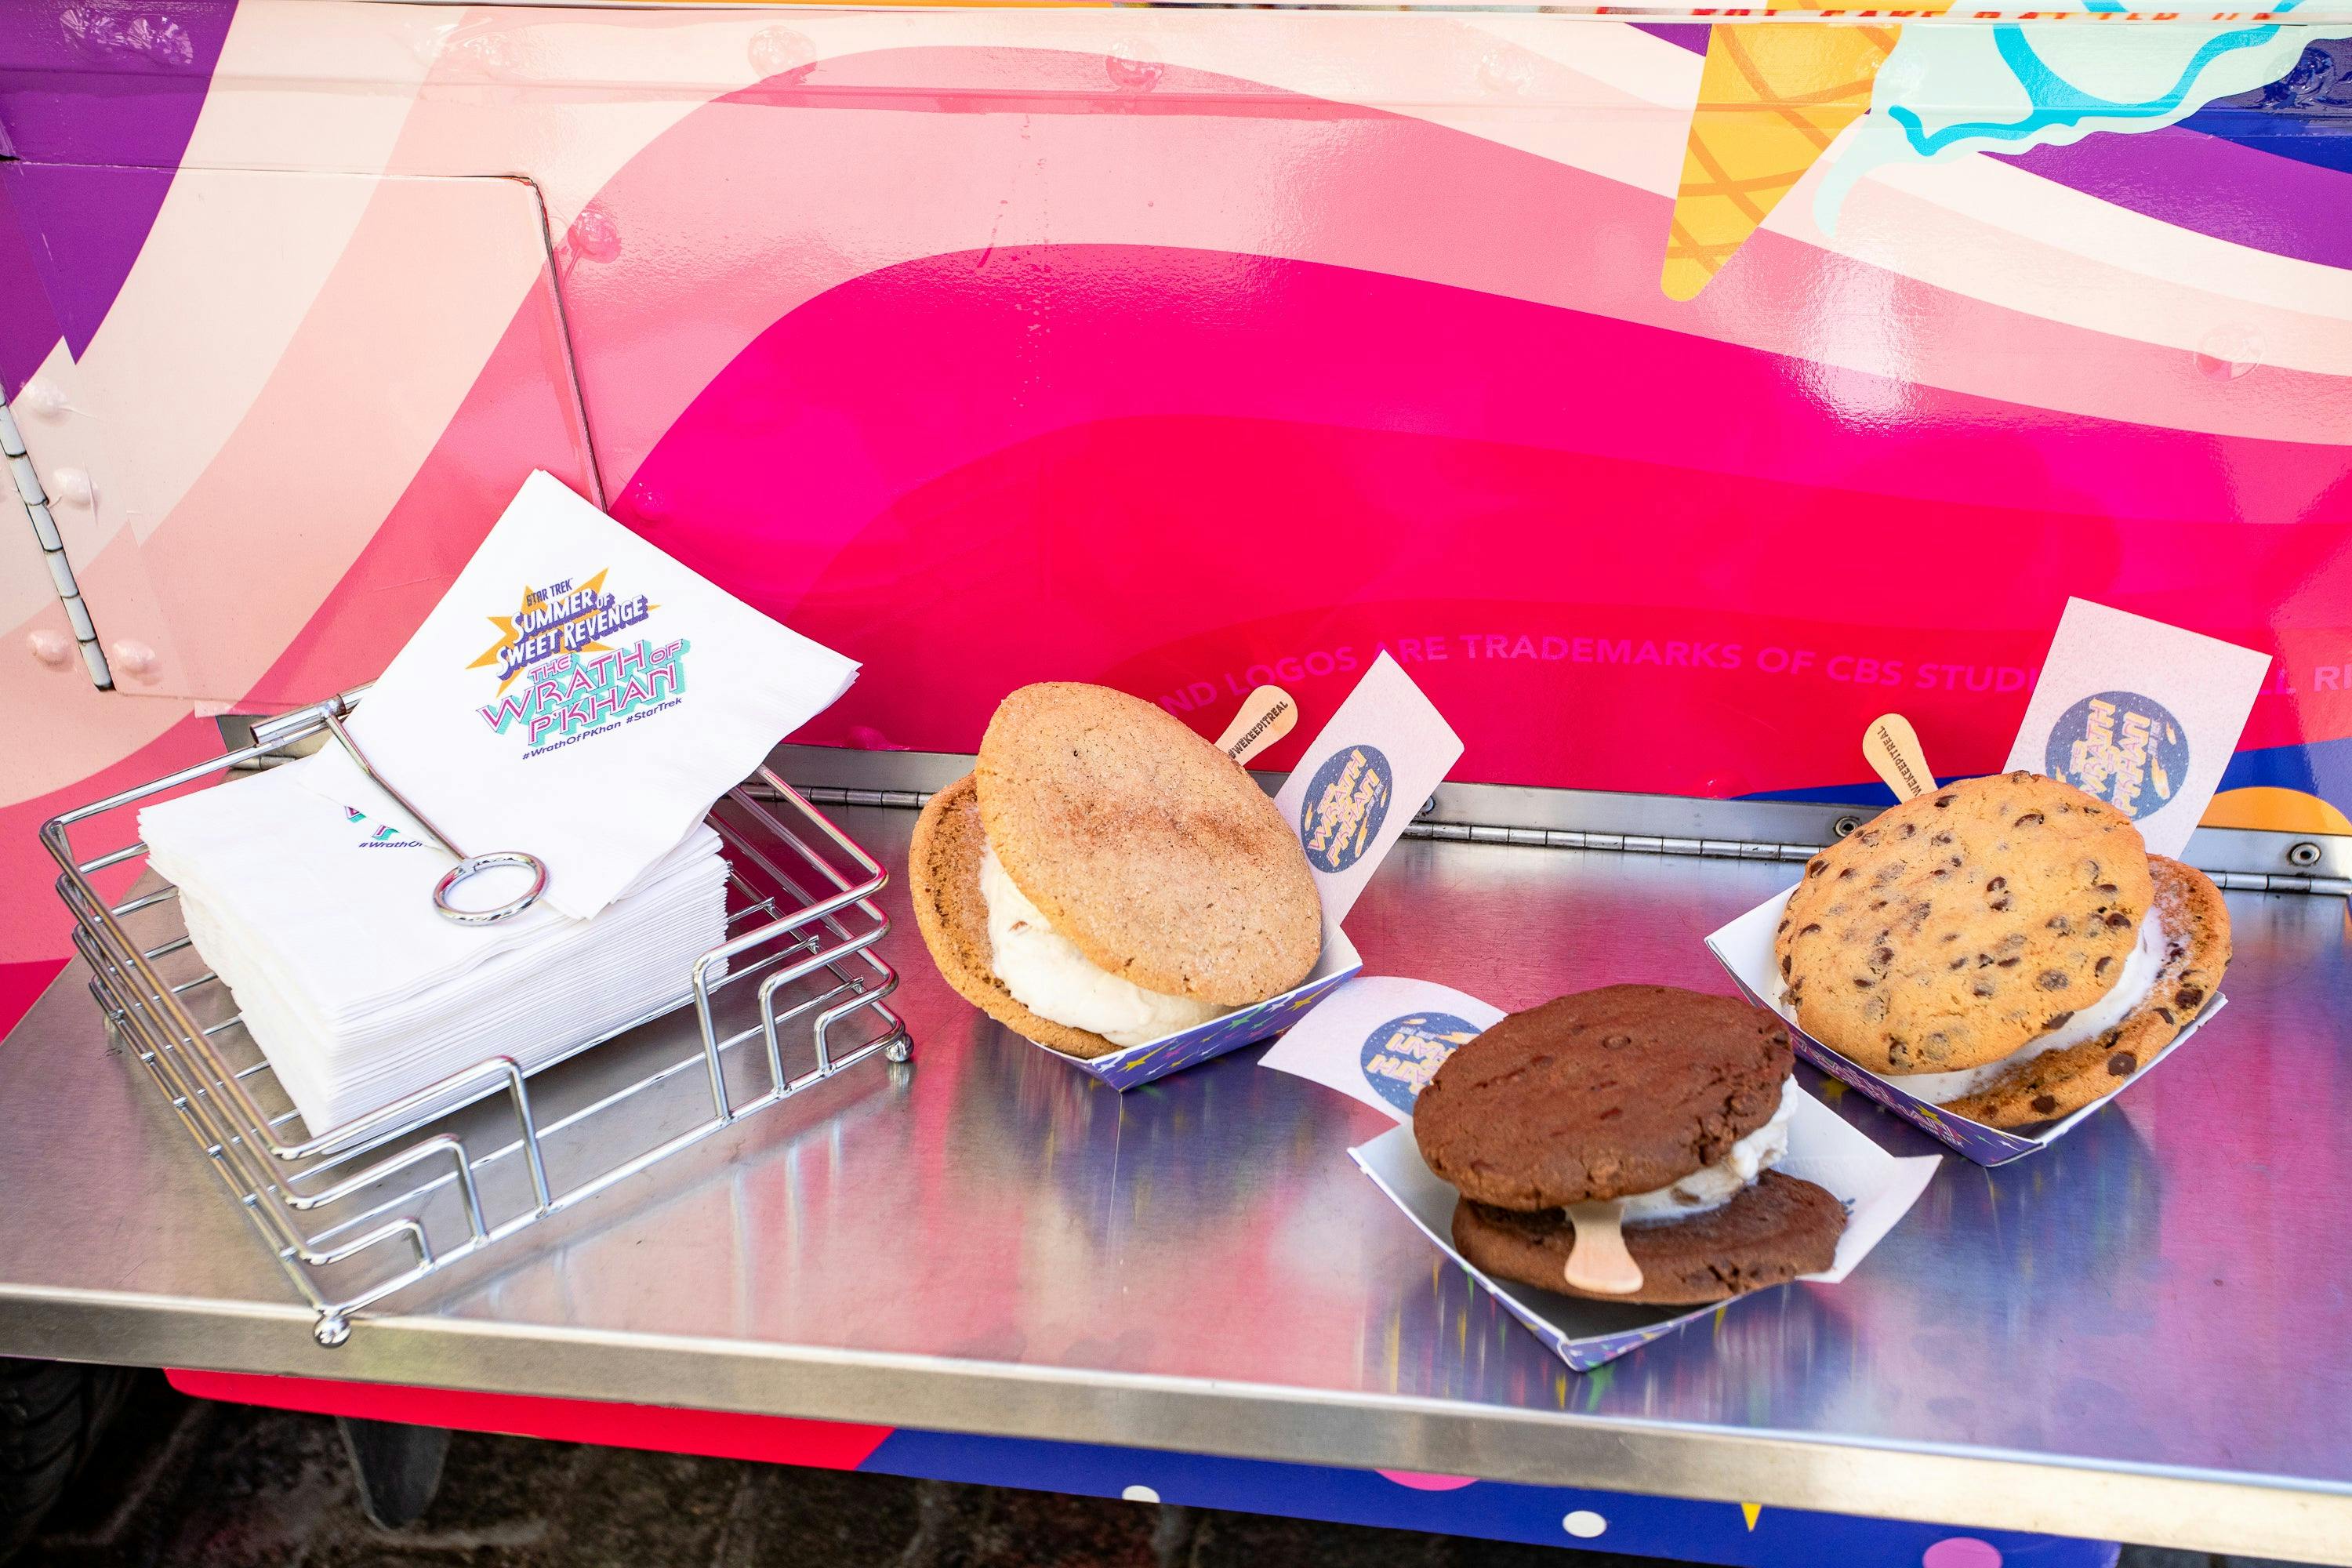 Three ice cream sandwiches sit on a metal ledge on the truck.